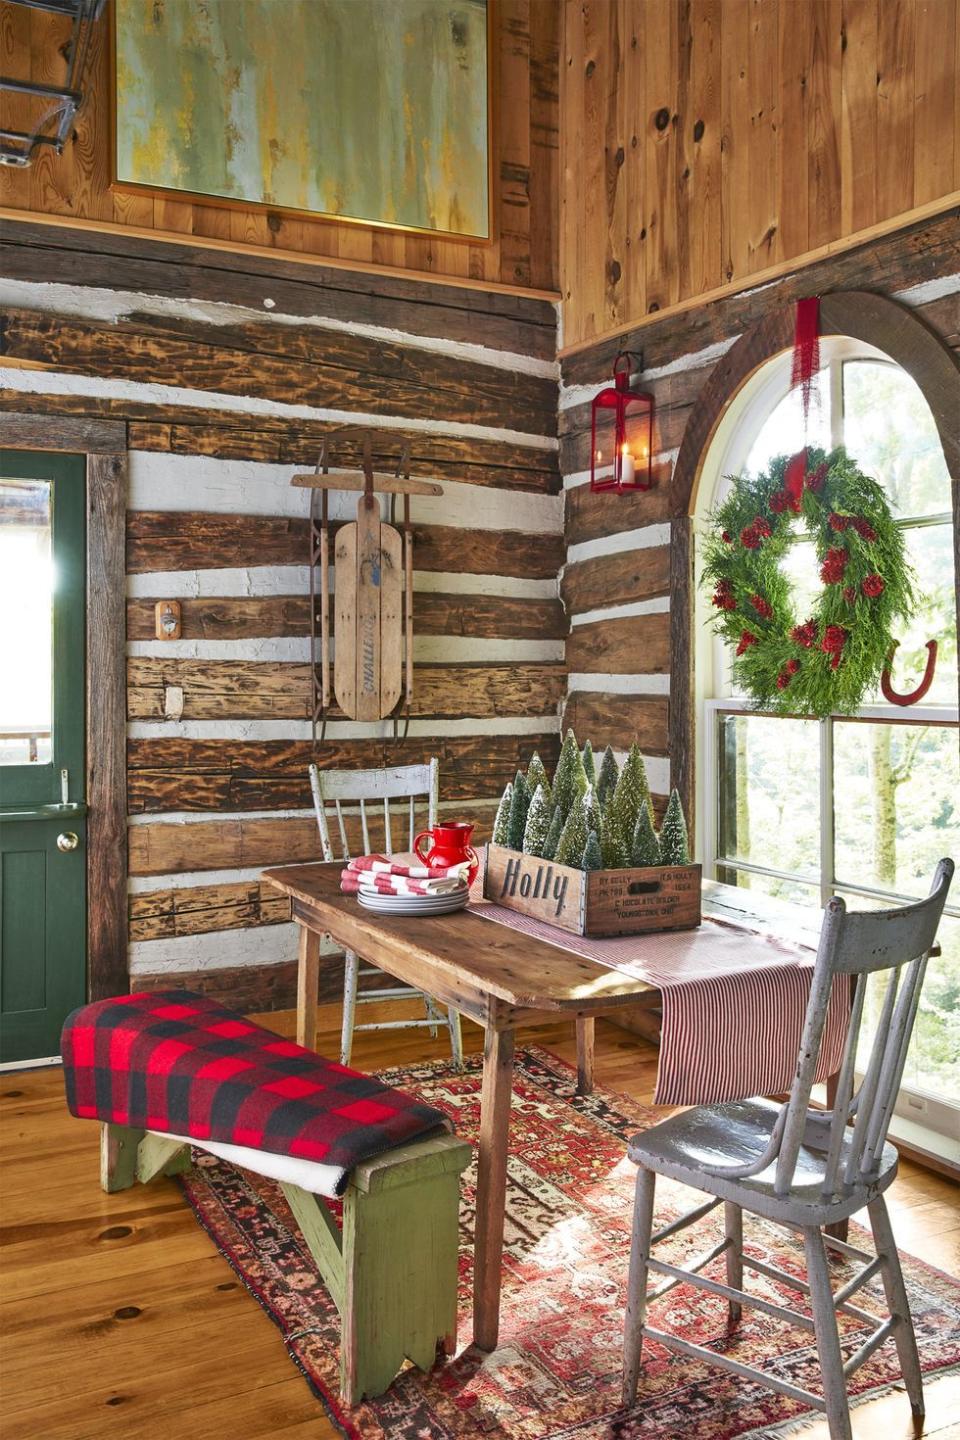 18 Winter Decorating Ideas to Make Your Home Feel Extra Cozy After Christmas